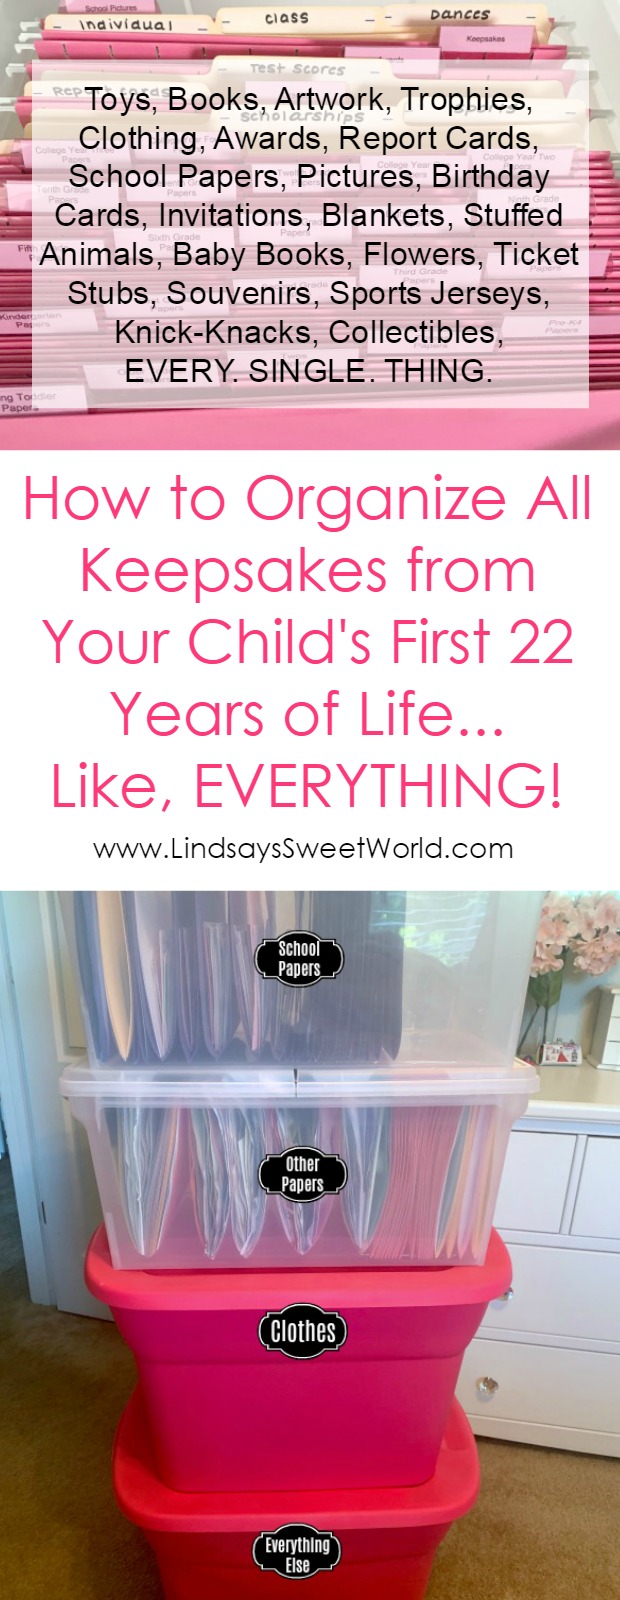 Lindsay's Sweet World: How to Organize ALL Keepsakes from Your